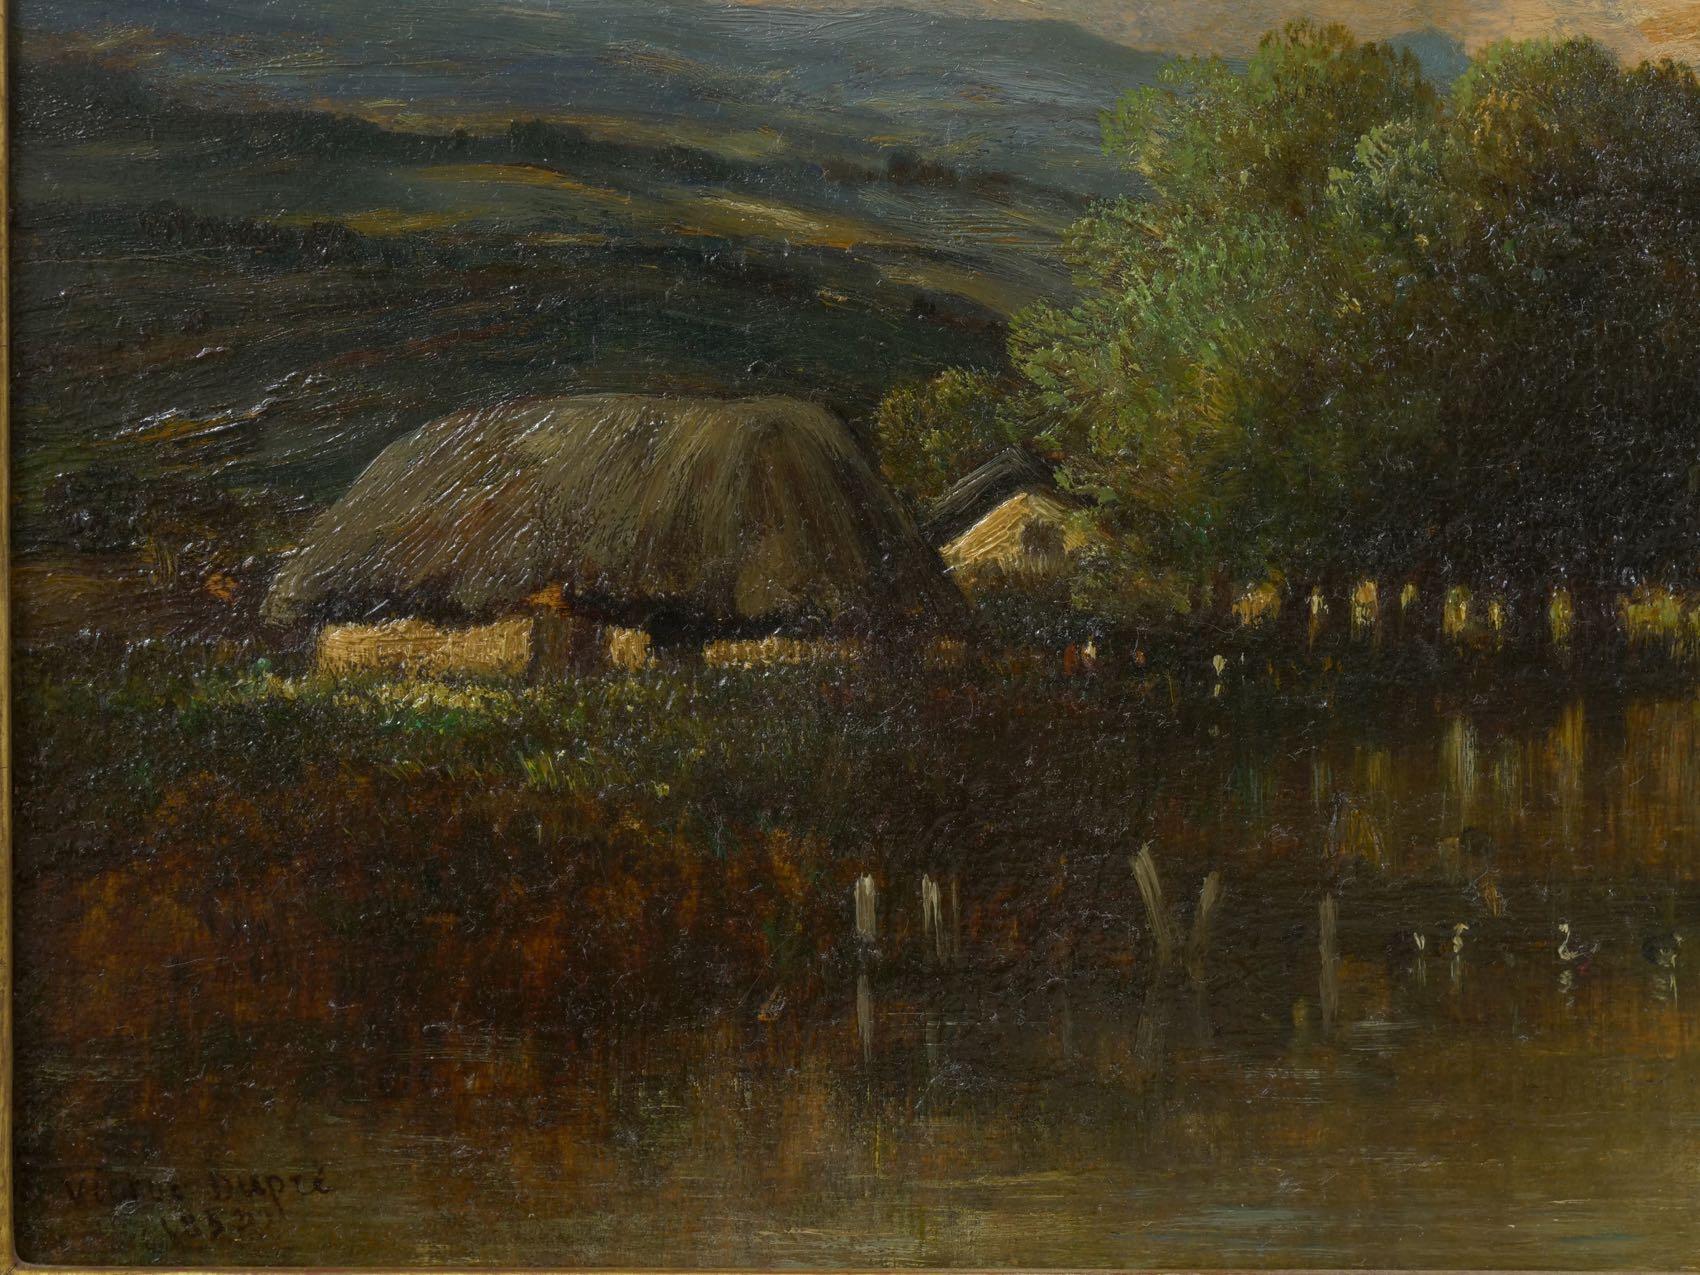 Hand-Painted “Cottage on a Lake” Barbizon Oil Painting by Victor Dupré, circa 1850